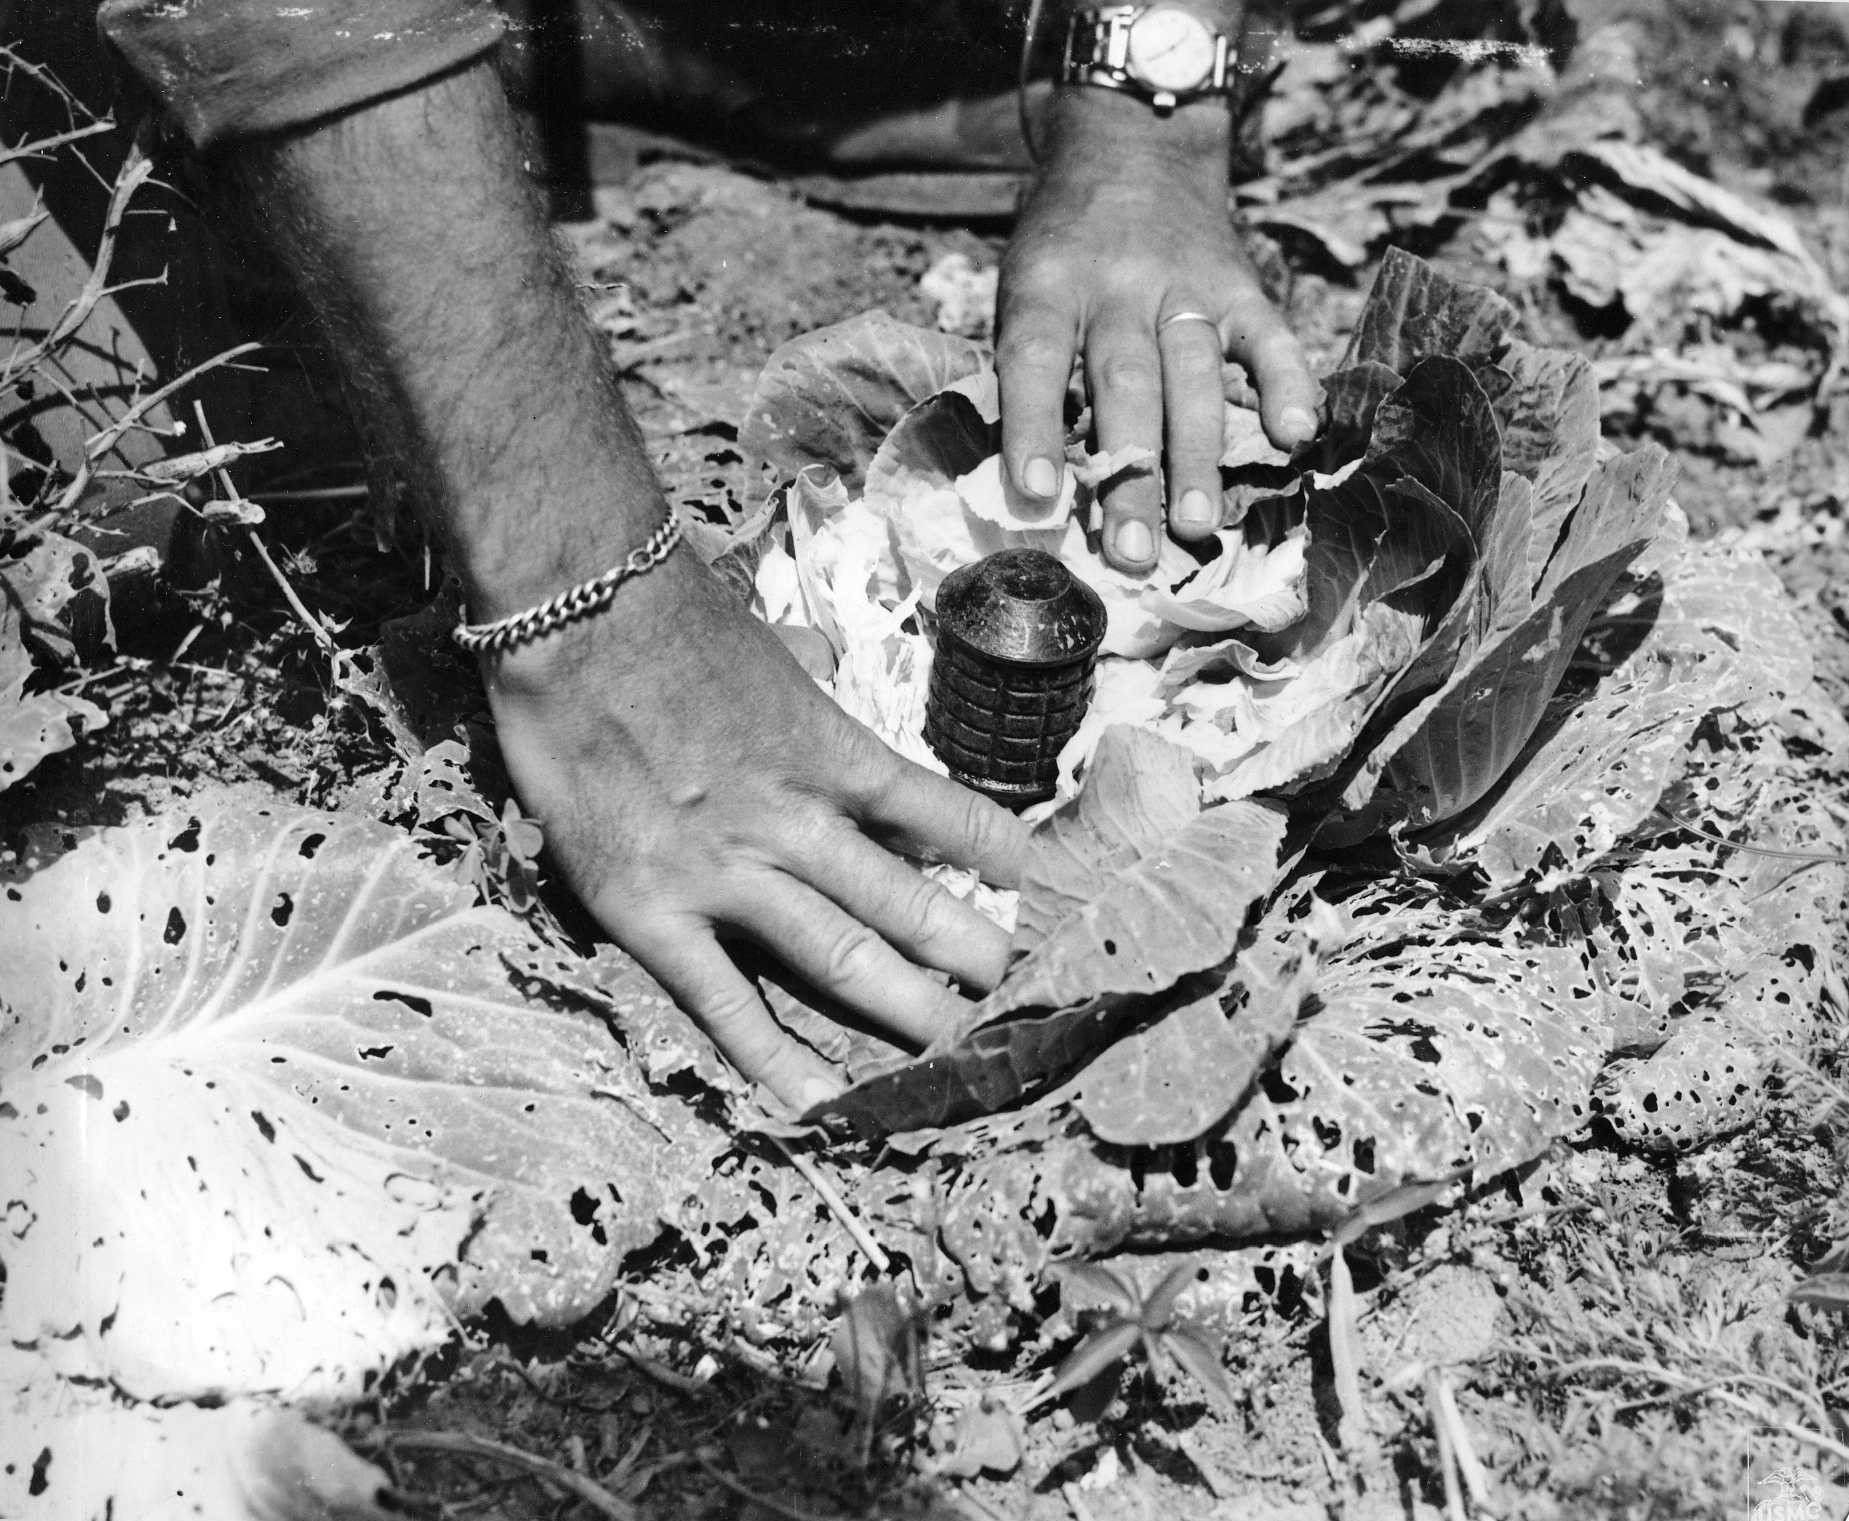 Cabbage booby-trapped by Japanese troops using a Type 97 grenade, Okinawa, Japan, Apr 1945